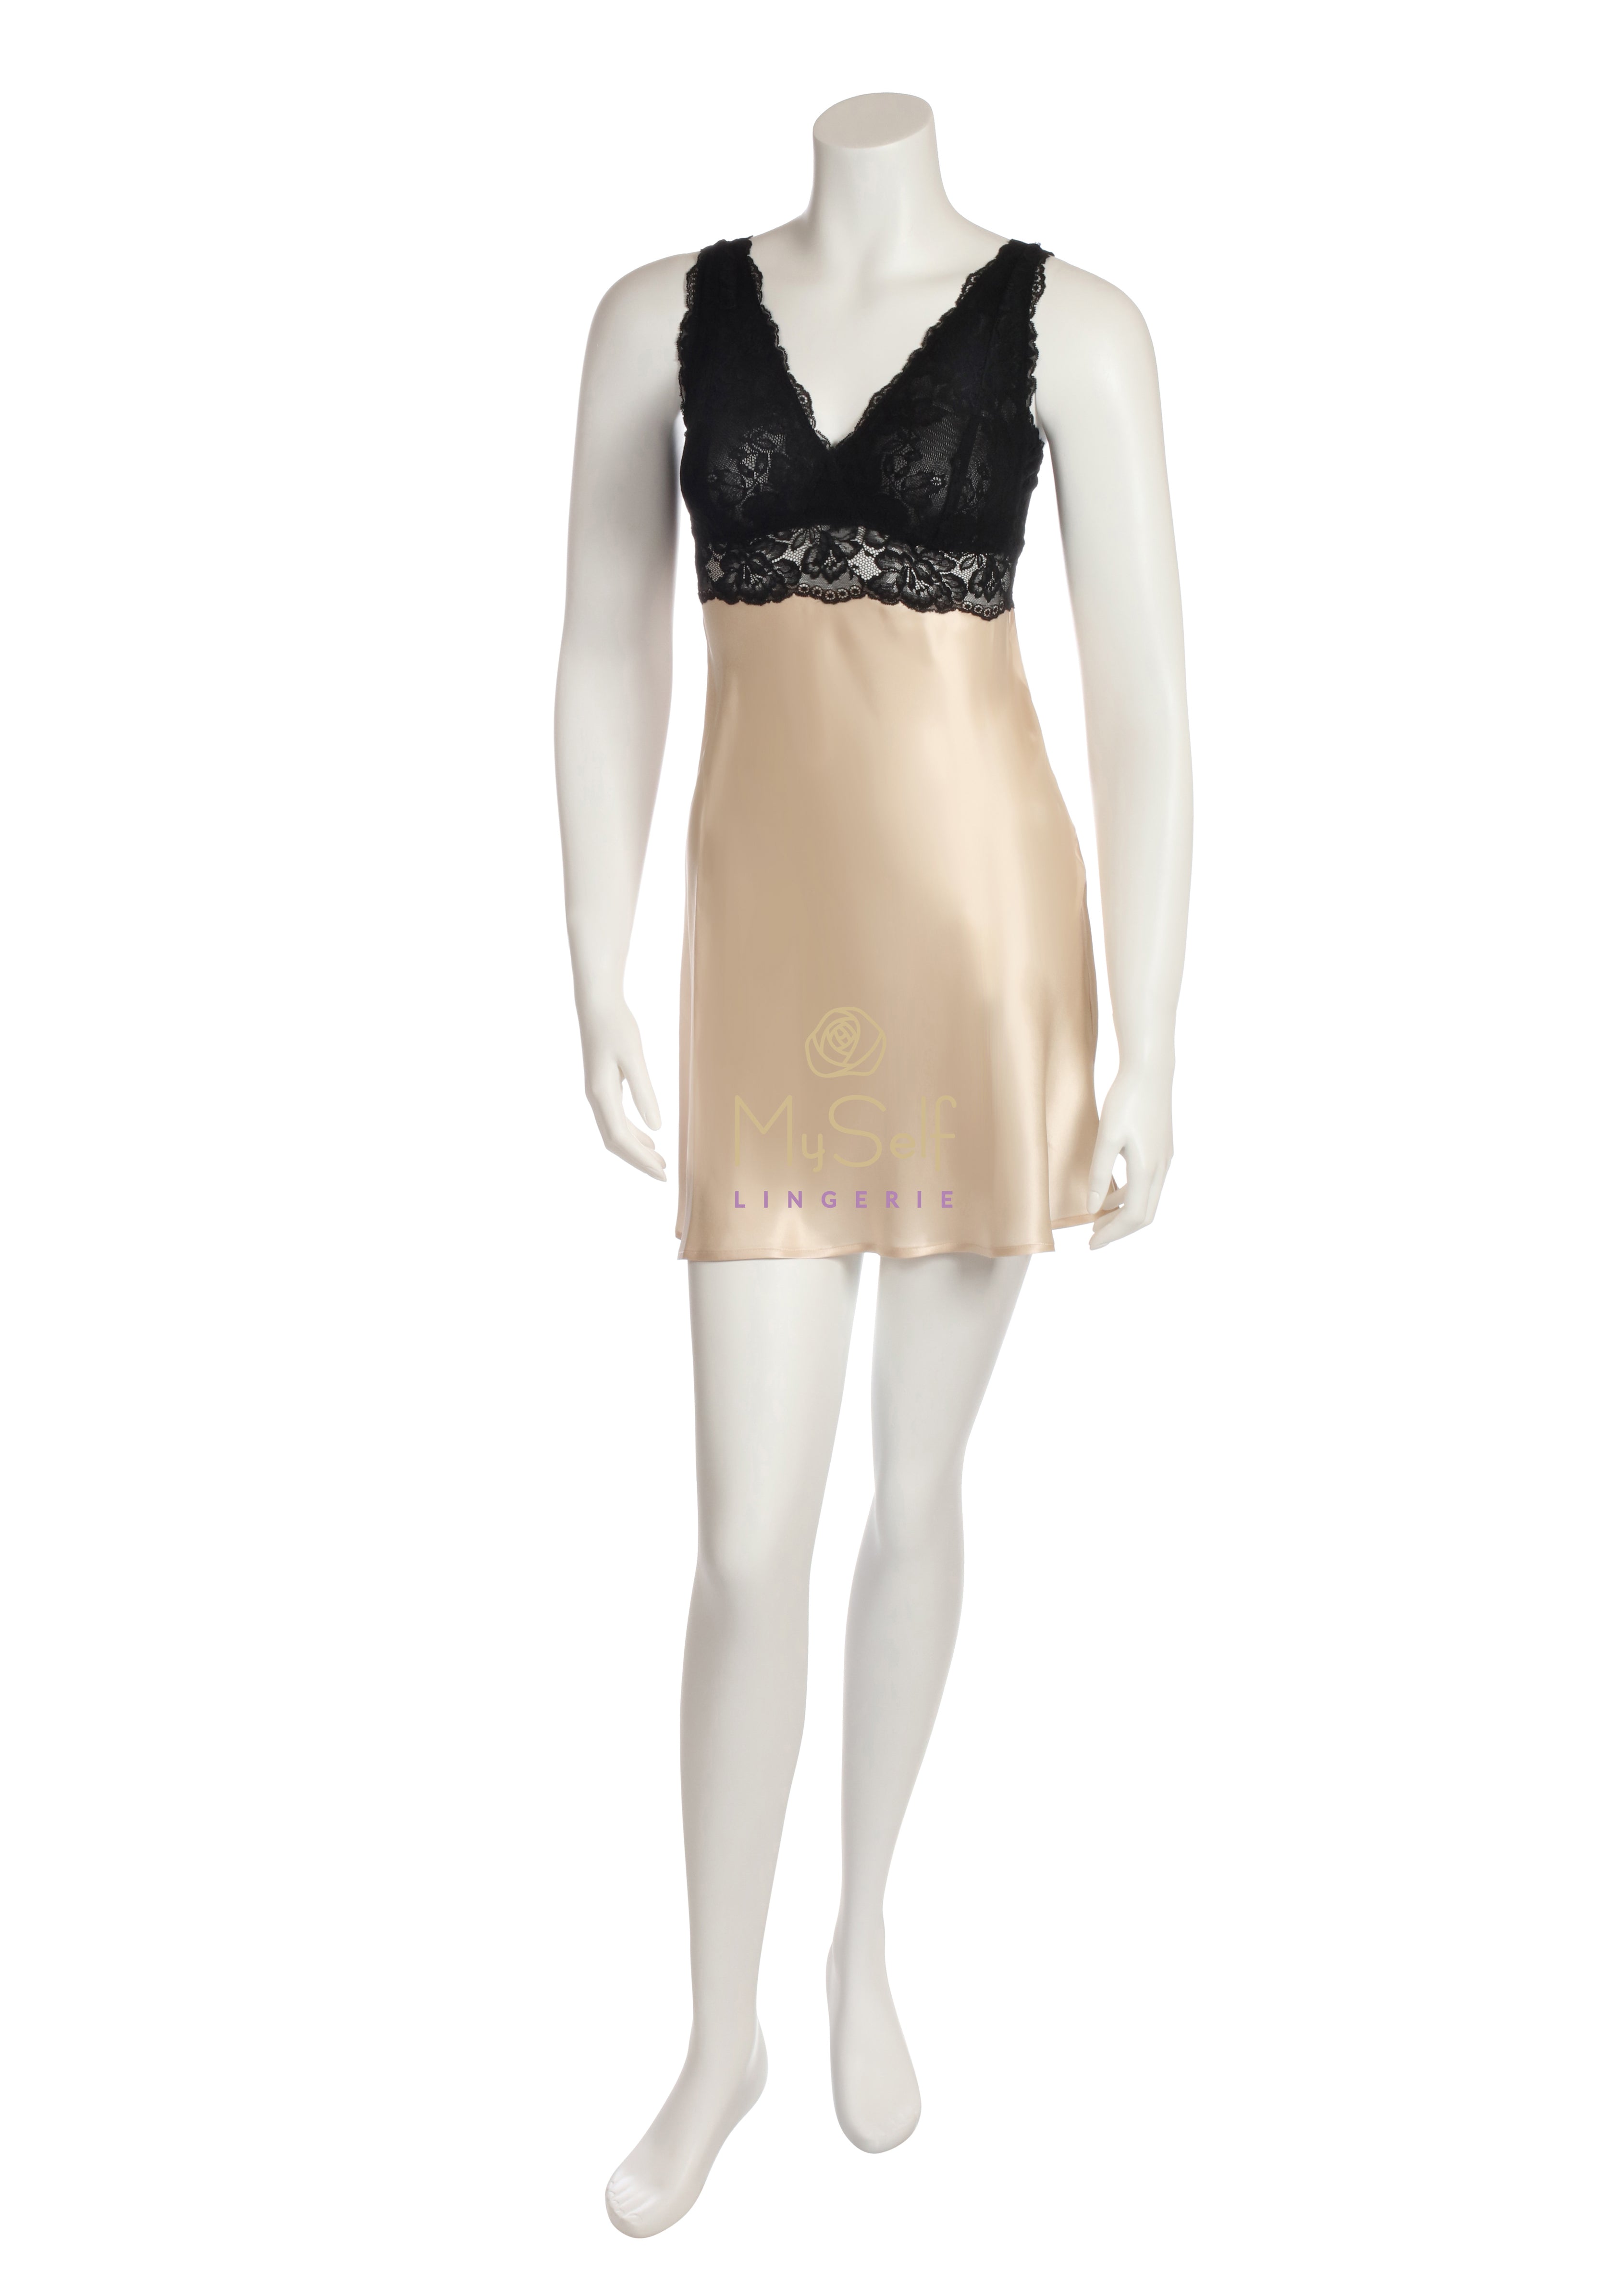 NK iMode 5974 Morgan Silk Chemise with Bust Support myselflingerie.com